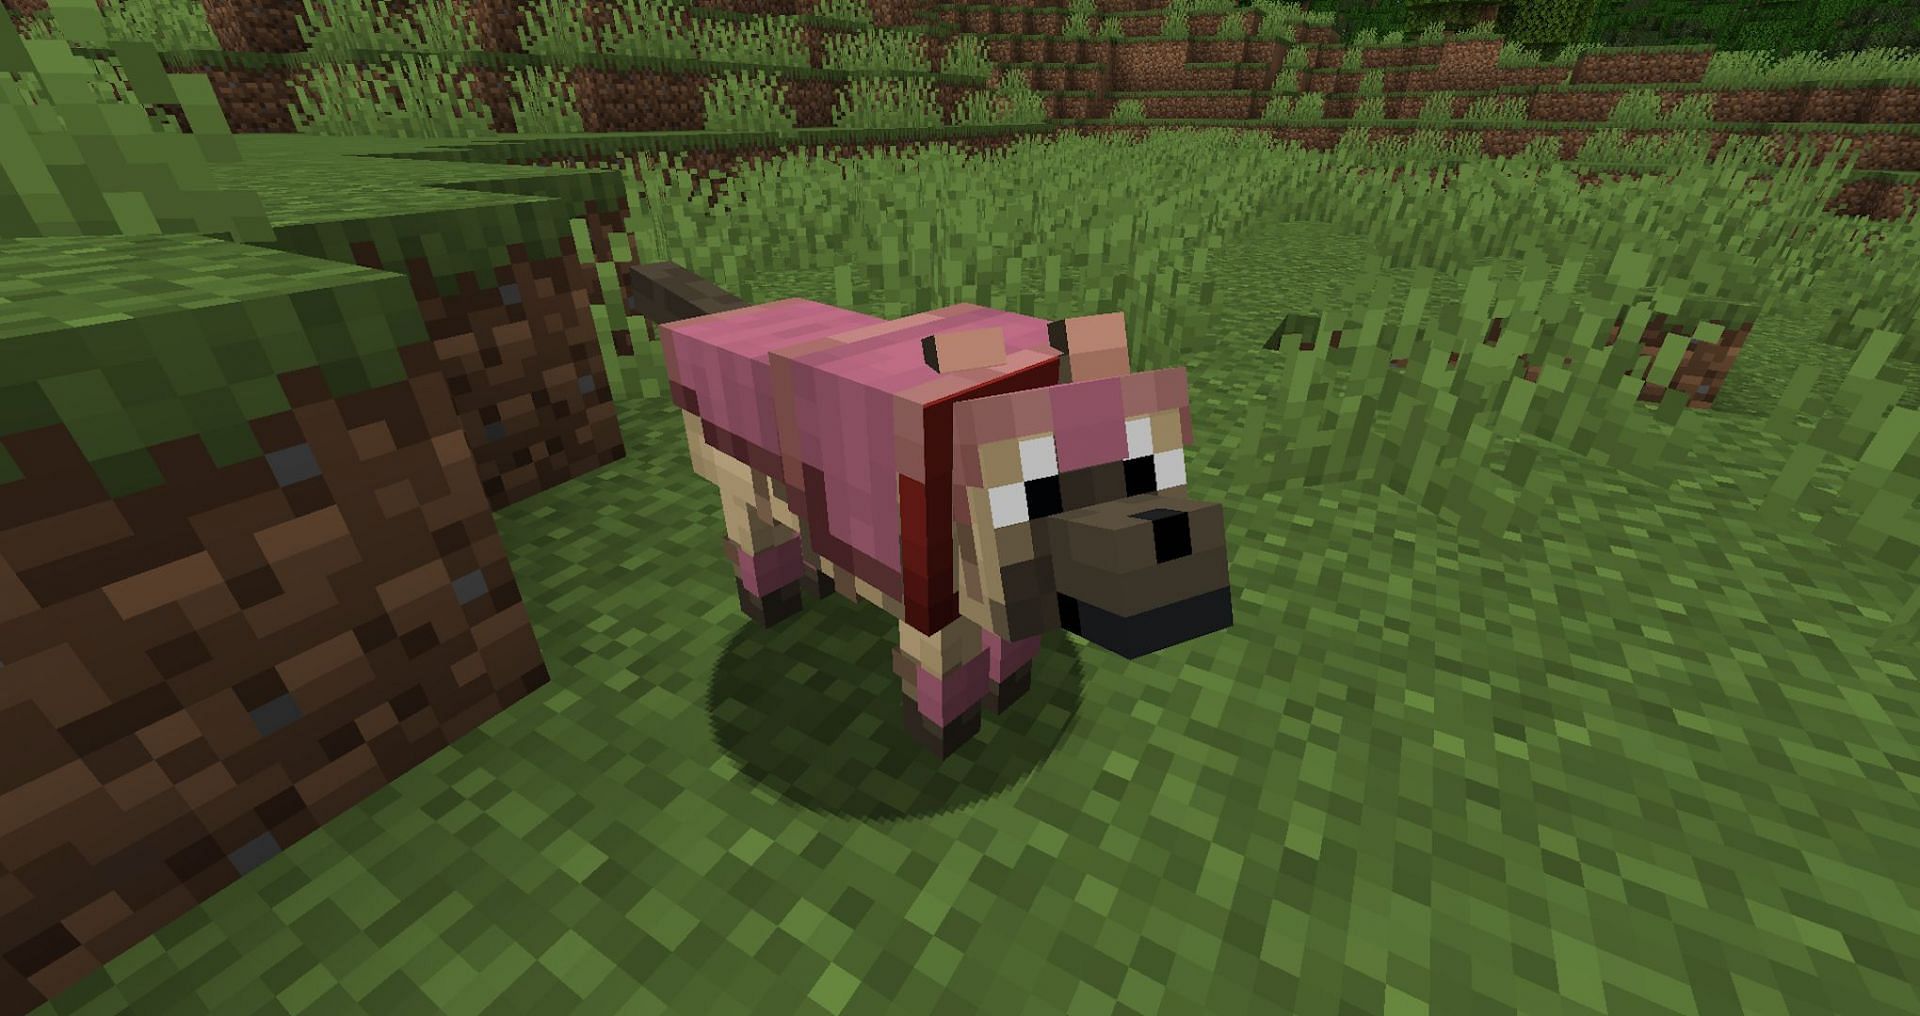 Thankfully, the armor is not lost even if the wolf is (Image via Mojang)